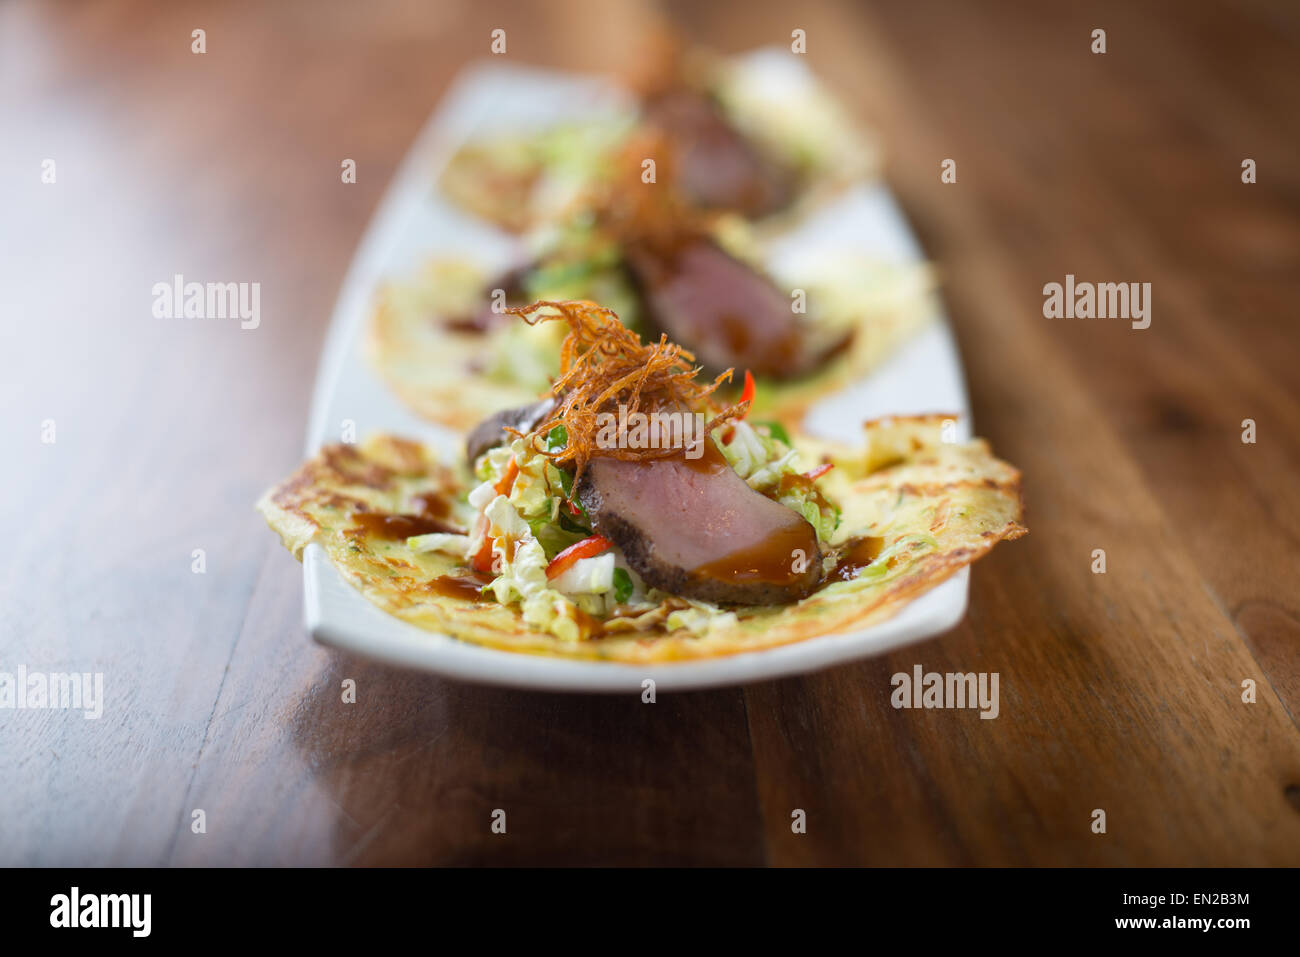 Three duck tacos on white plate with foreground in focus on wooden table Stock Photo